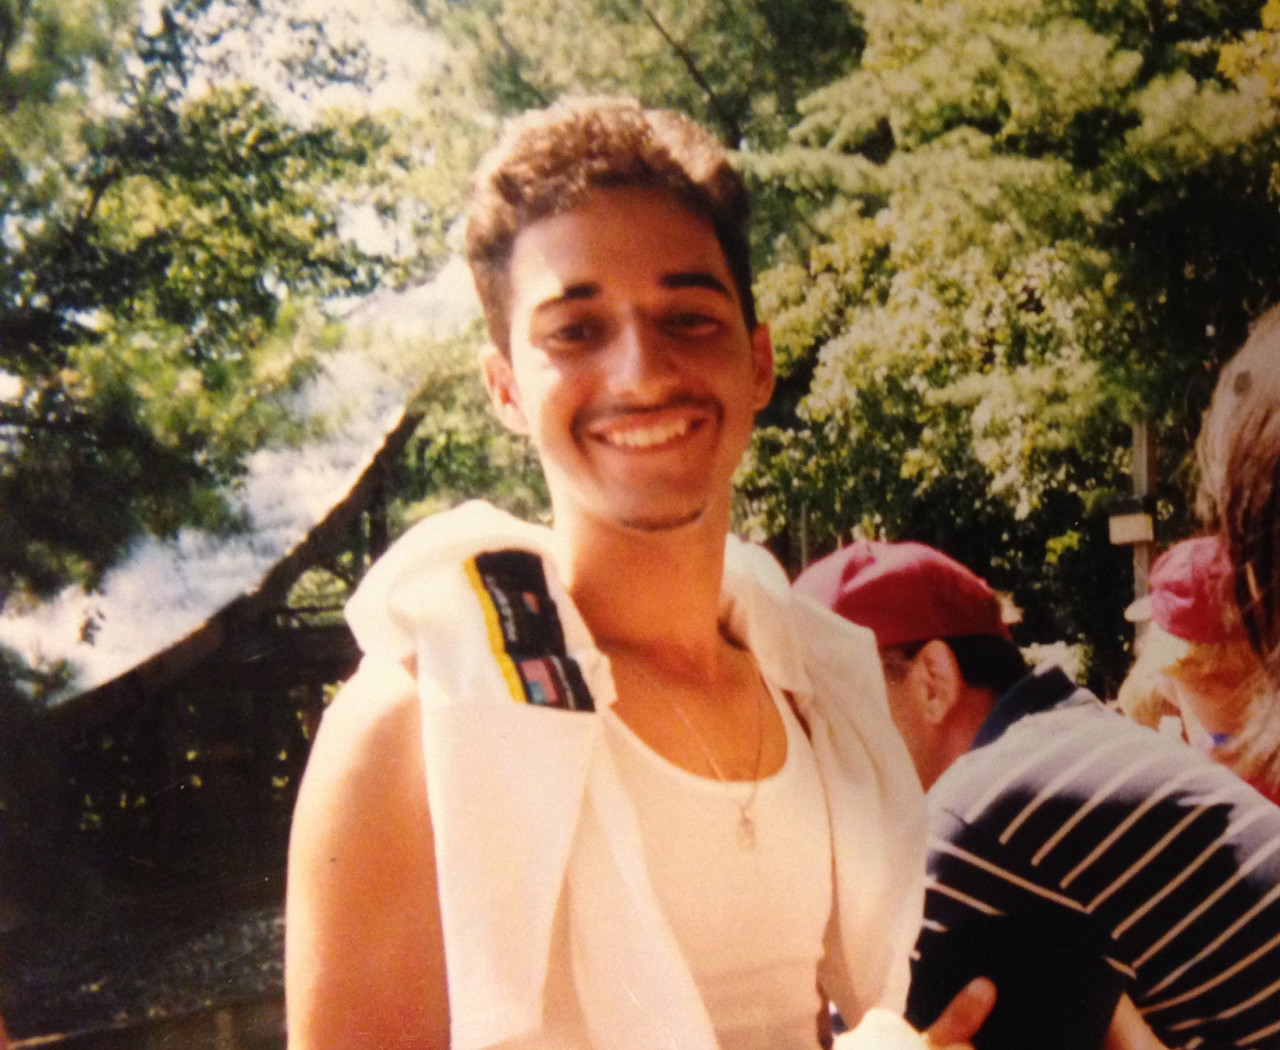 Adnan Syed in 1998. (Courtesy of Serial)